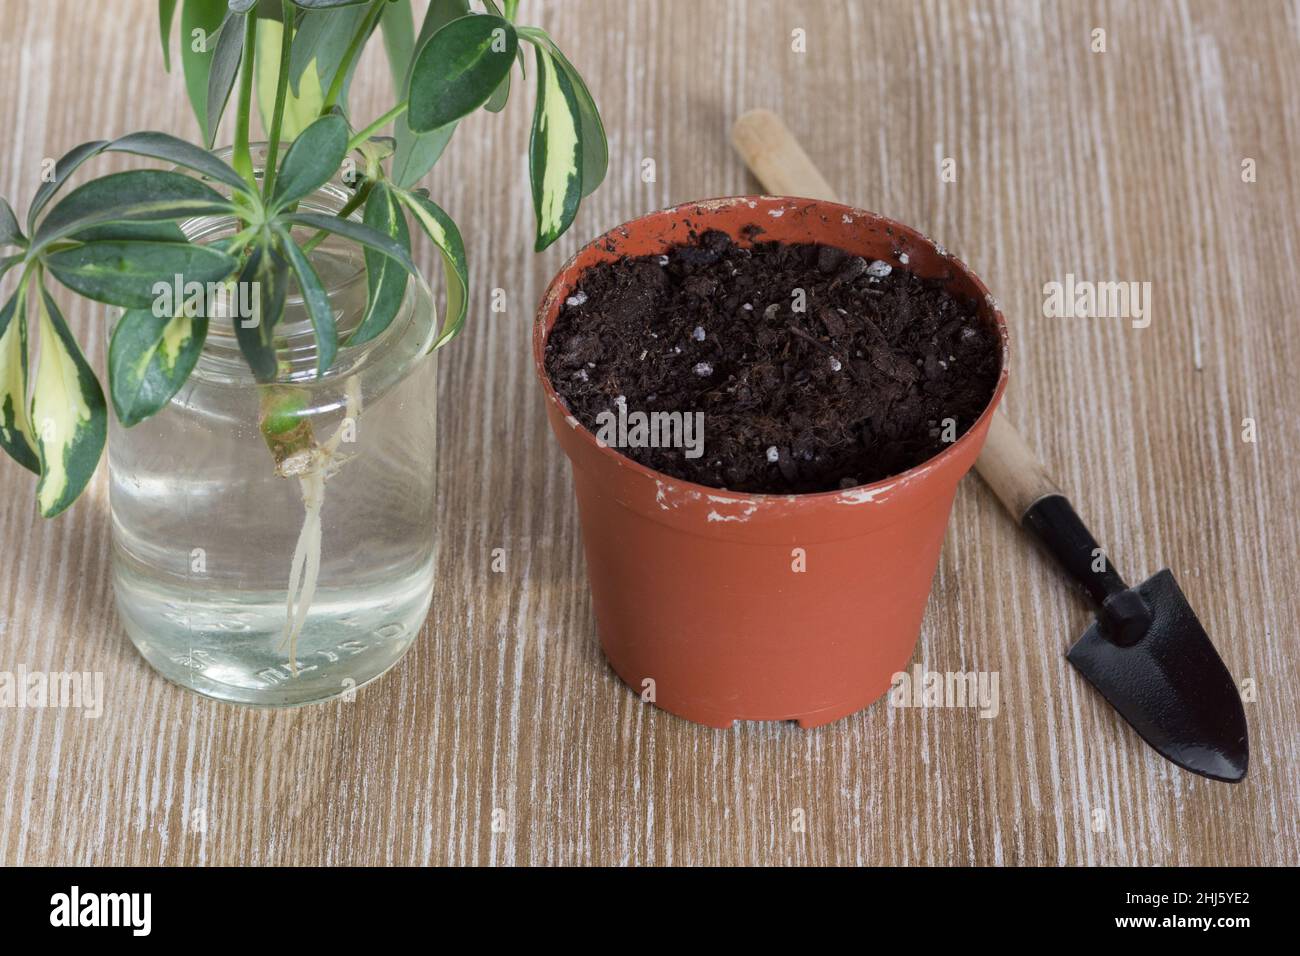 Cutting with root of Schefflera arboricola or dwarf umbrella tree named in bottle of water and pot with soil for planting on wooden background Stock Photo